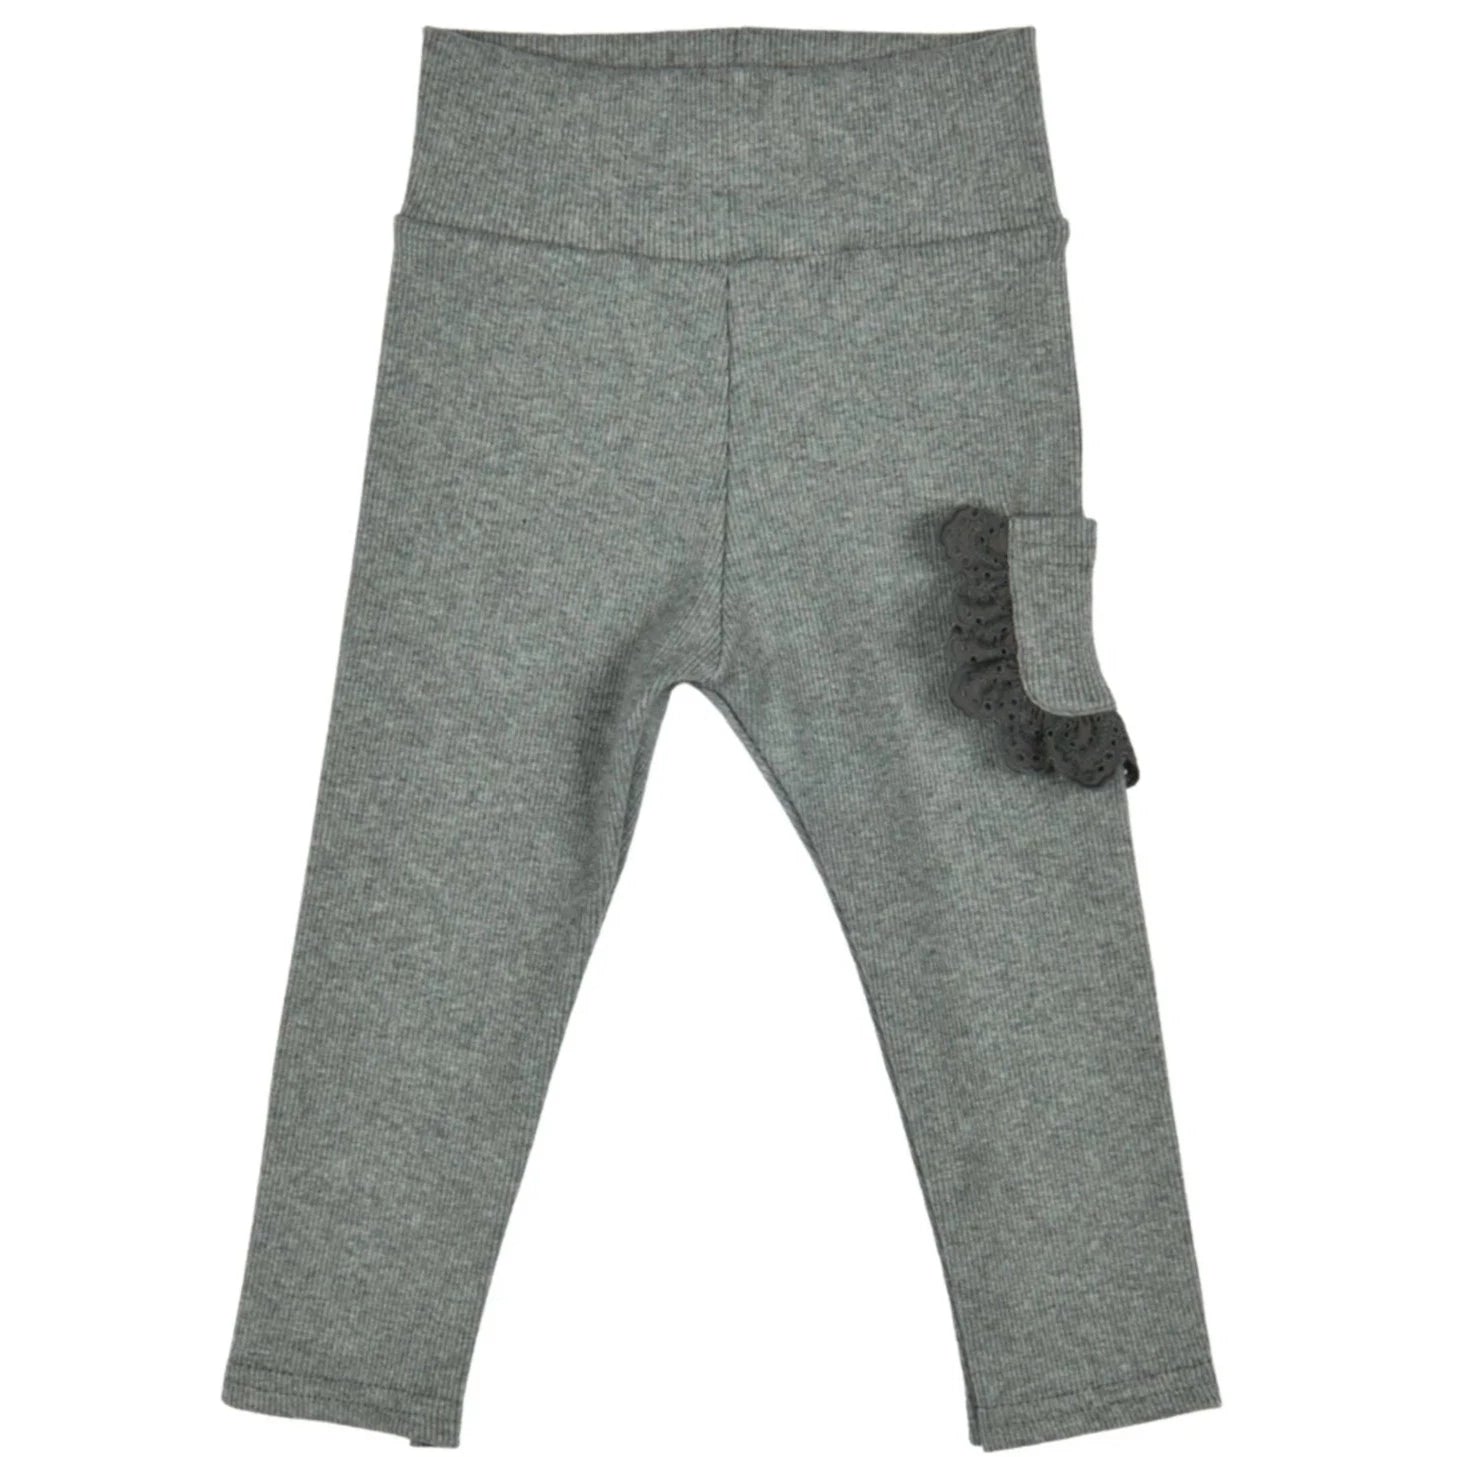 Bébé Sweeny Colly Leggings - Grey Ribbed Jersey Cotton with Lace 12M-36M - CapuletKids